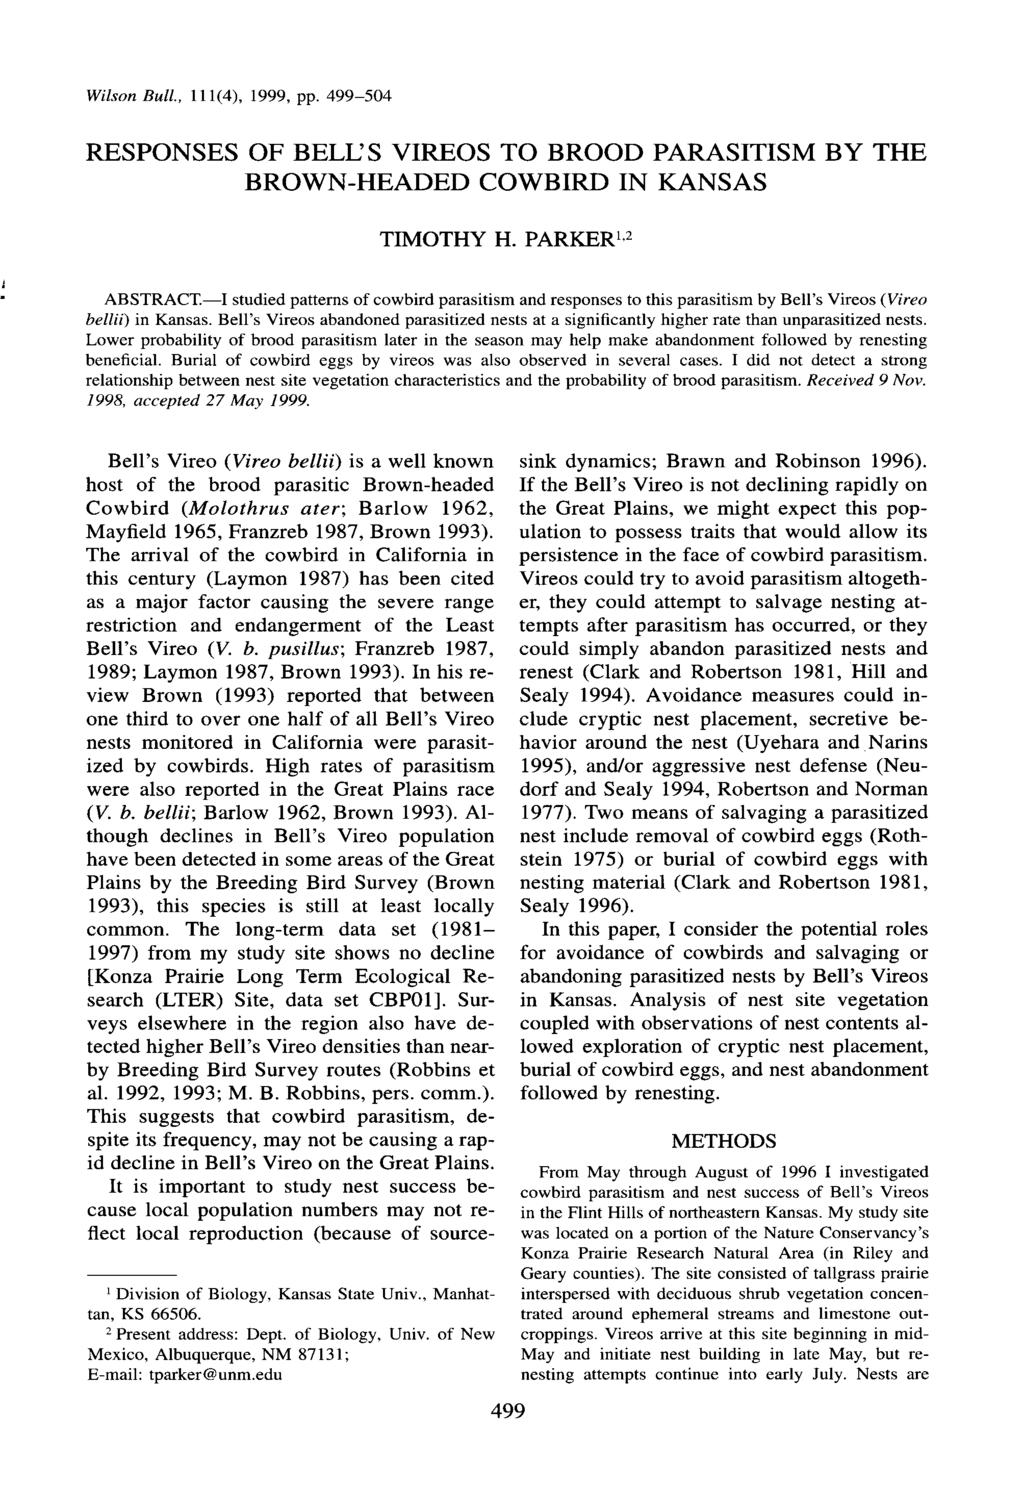 Wilson Bull., 11 l(4), 1999, pp. 499-504 RESPONSES OF BELL S VIREOS TO BROOD PARASITISM BY THE BROWN-HEADED COWBIRD IN KANSAS TIMOTHY H.